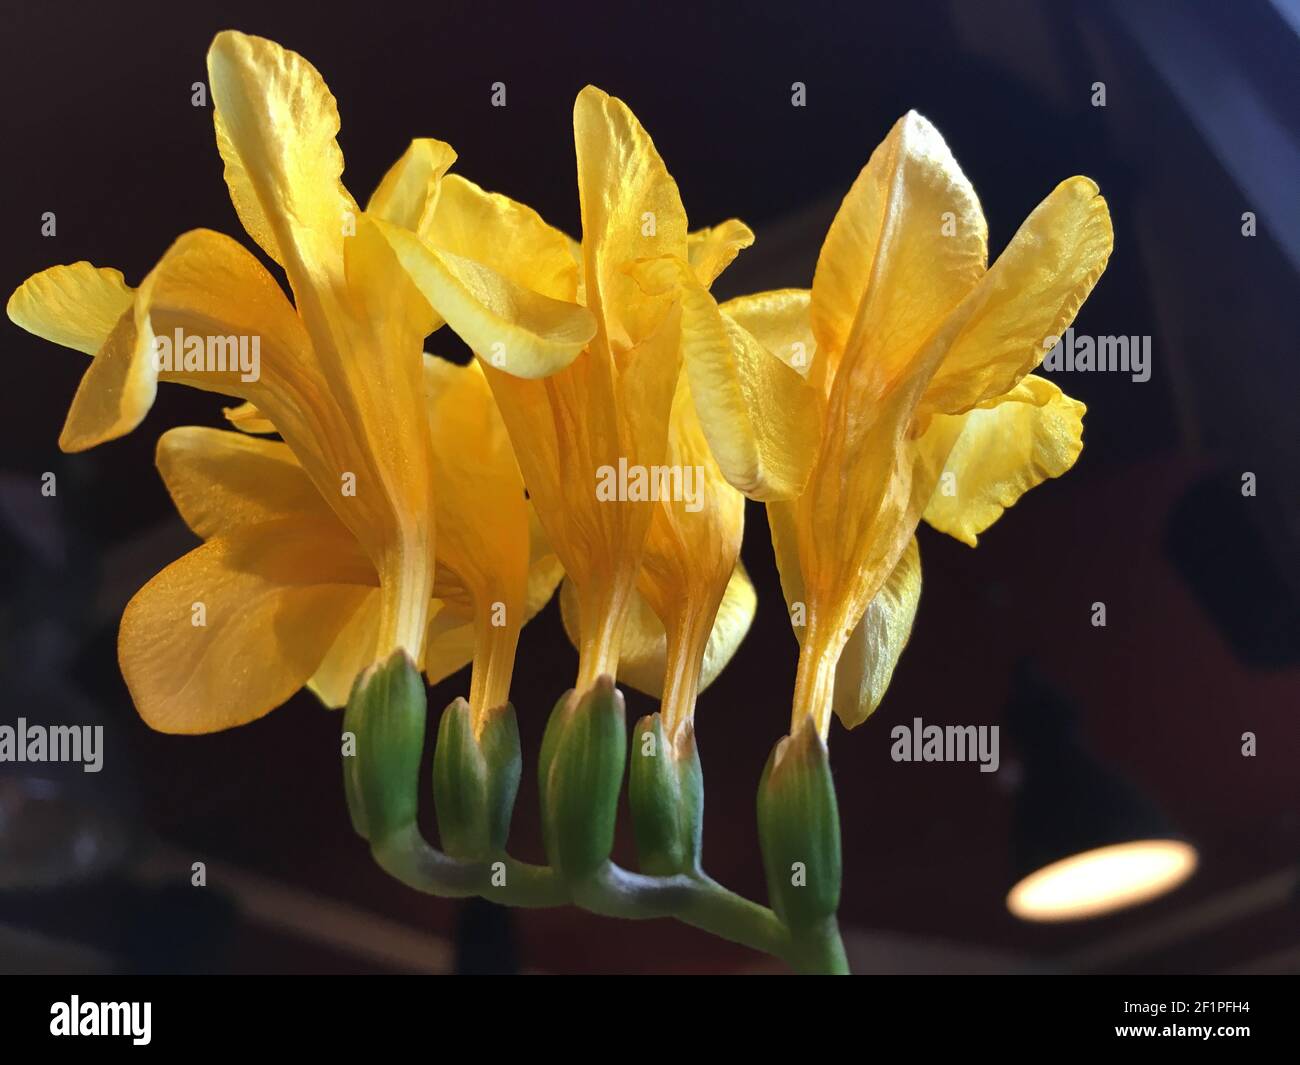 Yellow flowers with dark background, close up Stock Photo